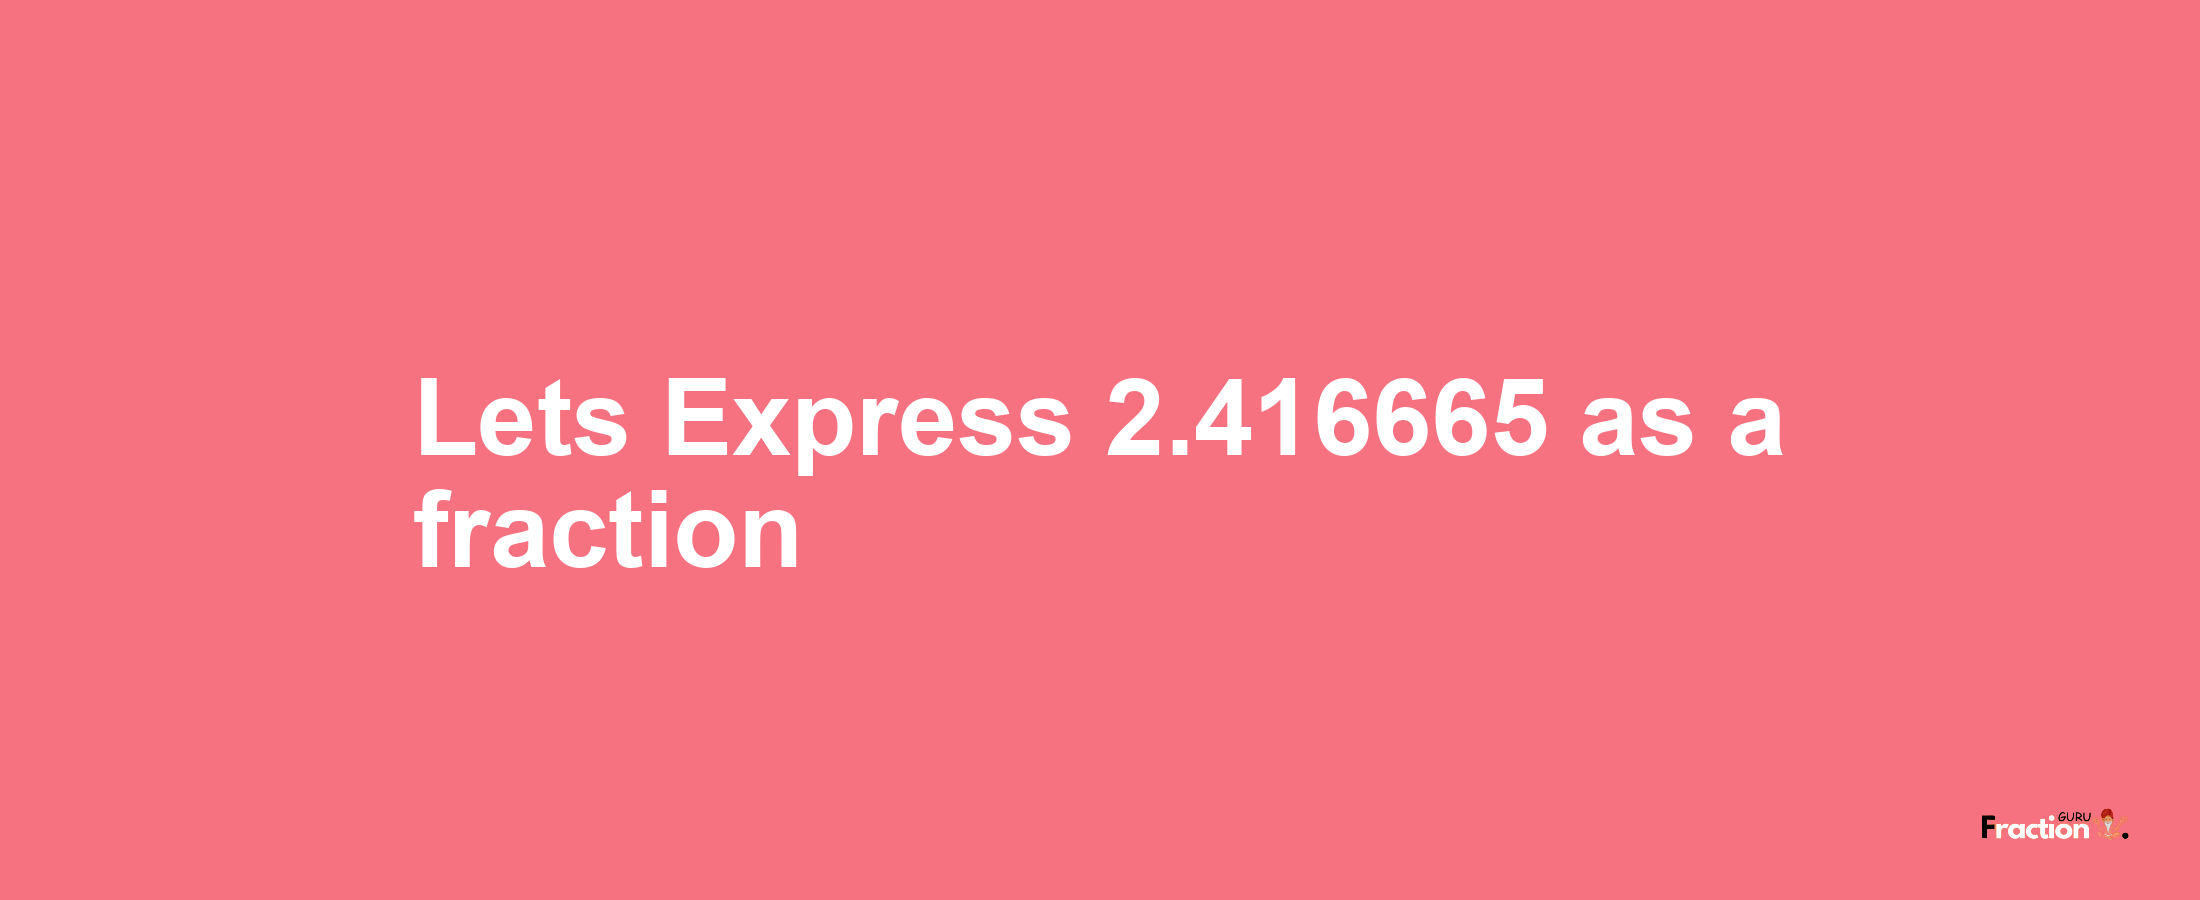 Lets Express 2.416665 as afraction